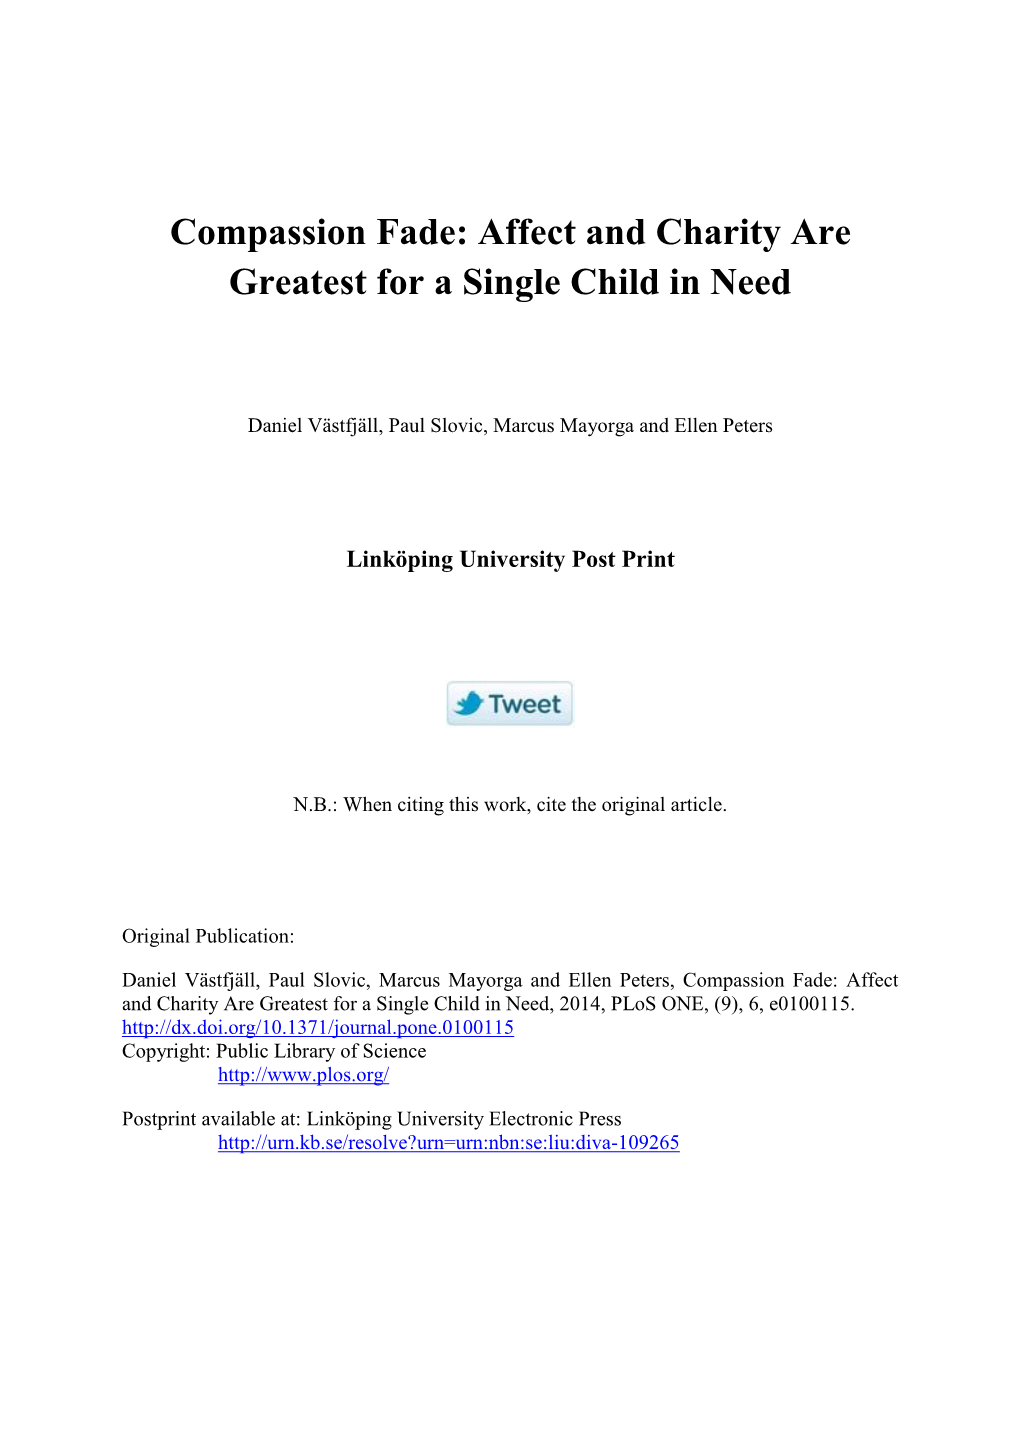 Compassion Fade: Affect and Charity Are Greatest for a Single Child in Need